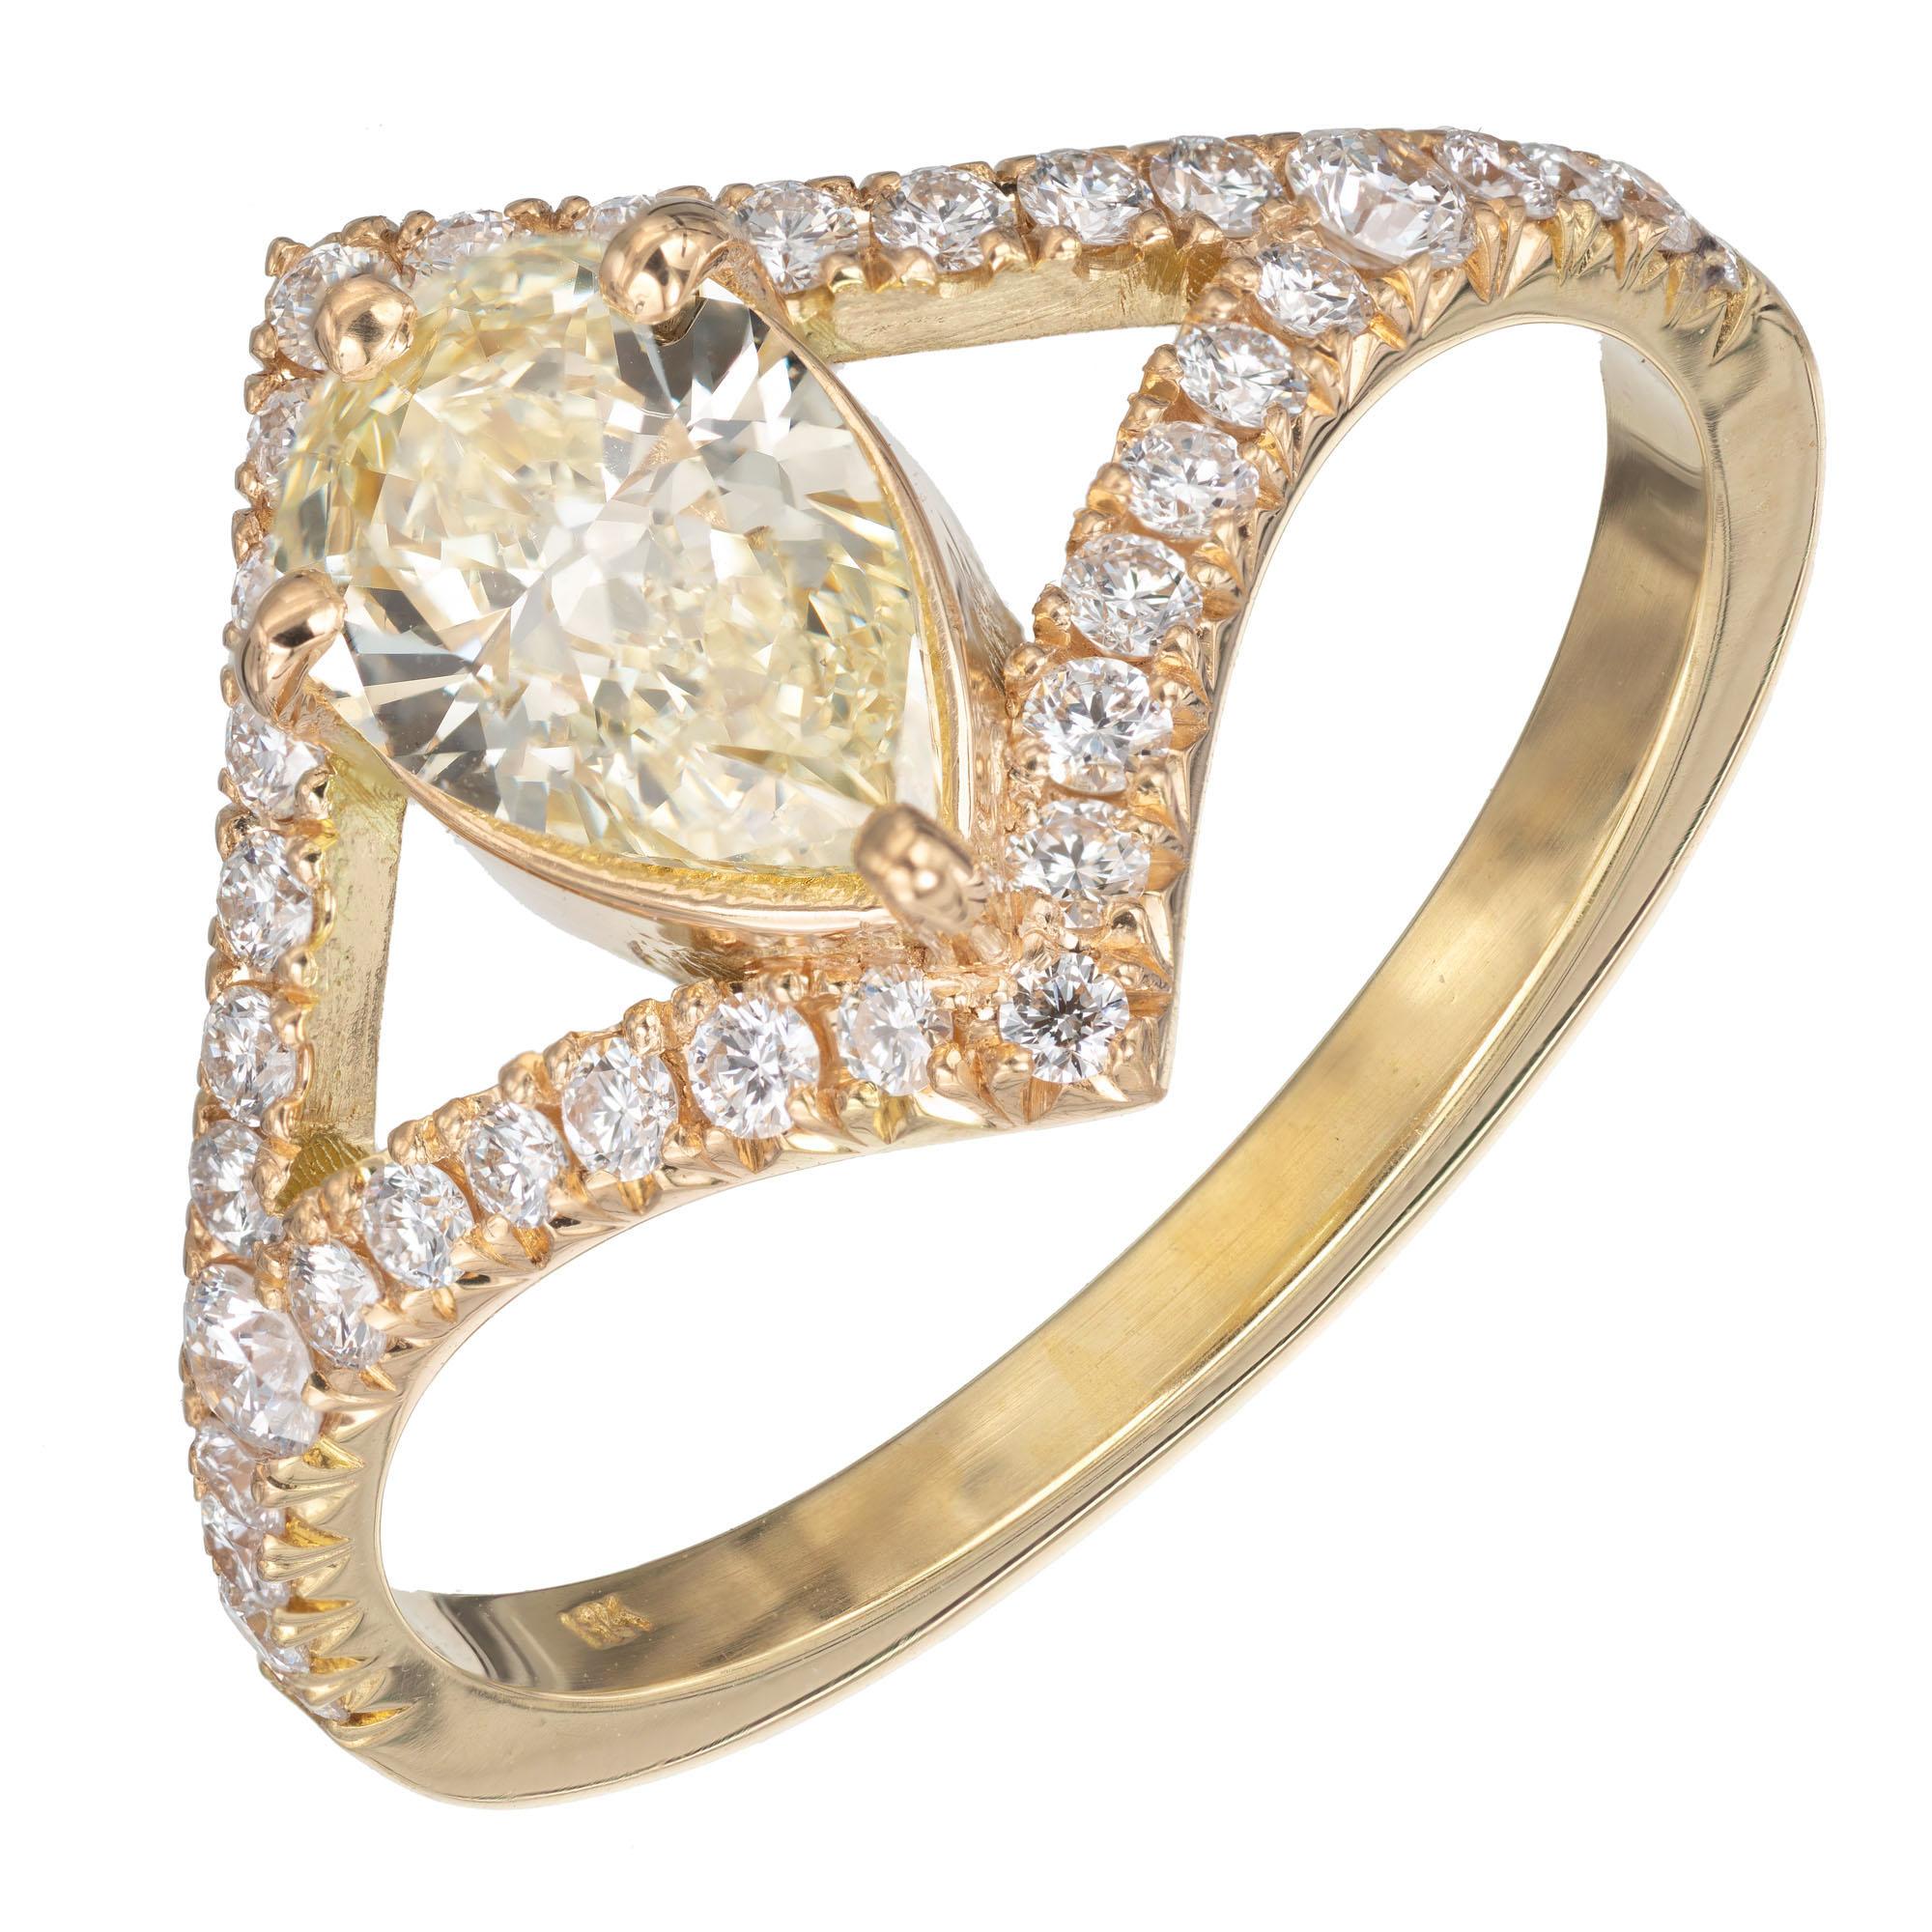 GIA certified. .70 carat pear-shaped light-yellow diamond in a micro pave white diamond 18k yellow gold setting. Crafted in the Peter Suchy Workshop.

1 pear brilliant cut light yellow diamond Y-Z VVS2, approx. .70cts Certificate # 620422386
36